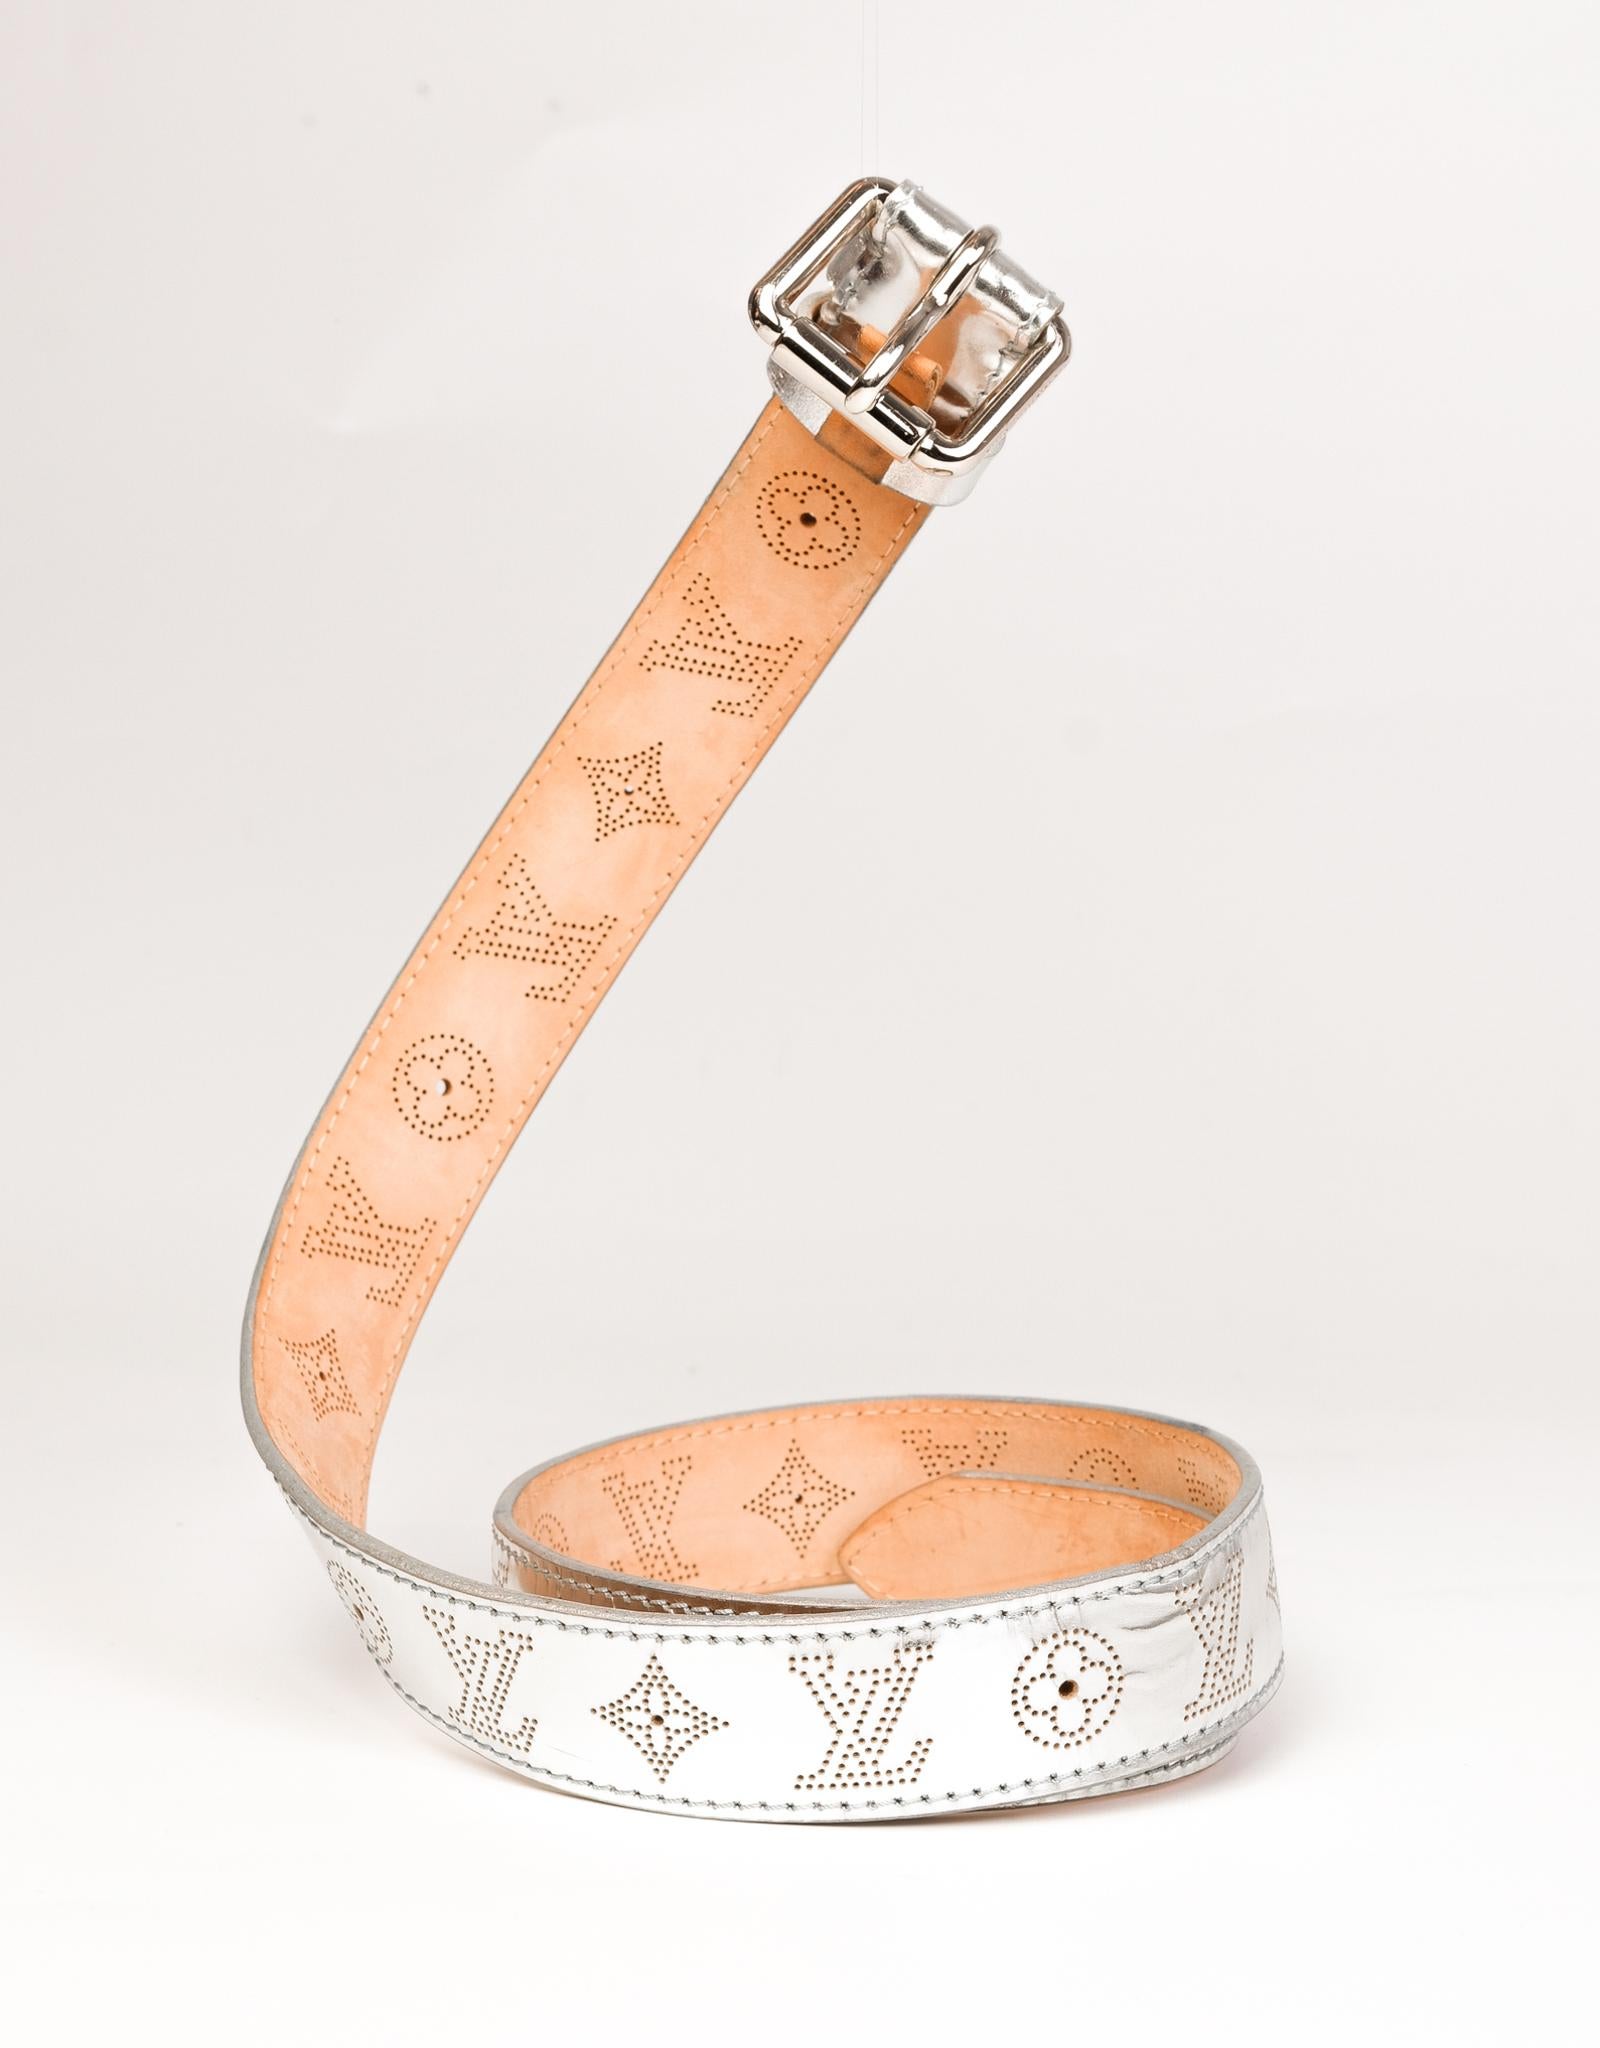 Classic Louis Vuitton Mahina silver skinny belt with silver hardware. 

COLOR: Silver
DATE CODE: CA1017
MATERIAL: Leather
MEASURES: L 36” x W 1”
SIZE: 80/32
EST. RETAIL: $895
COMES WITH: Dust bag
CONDITION: Good  - Leather shows stretching and signs